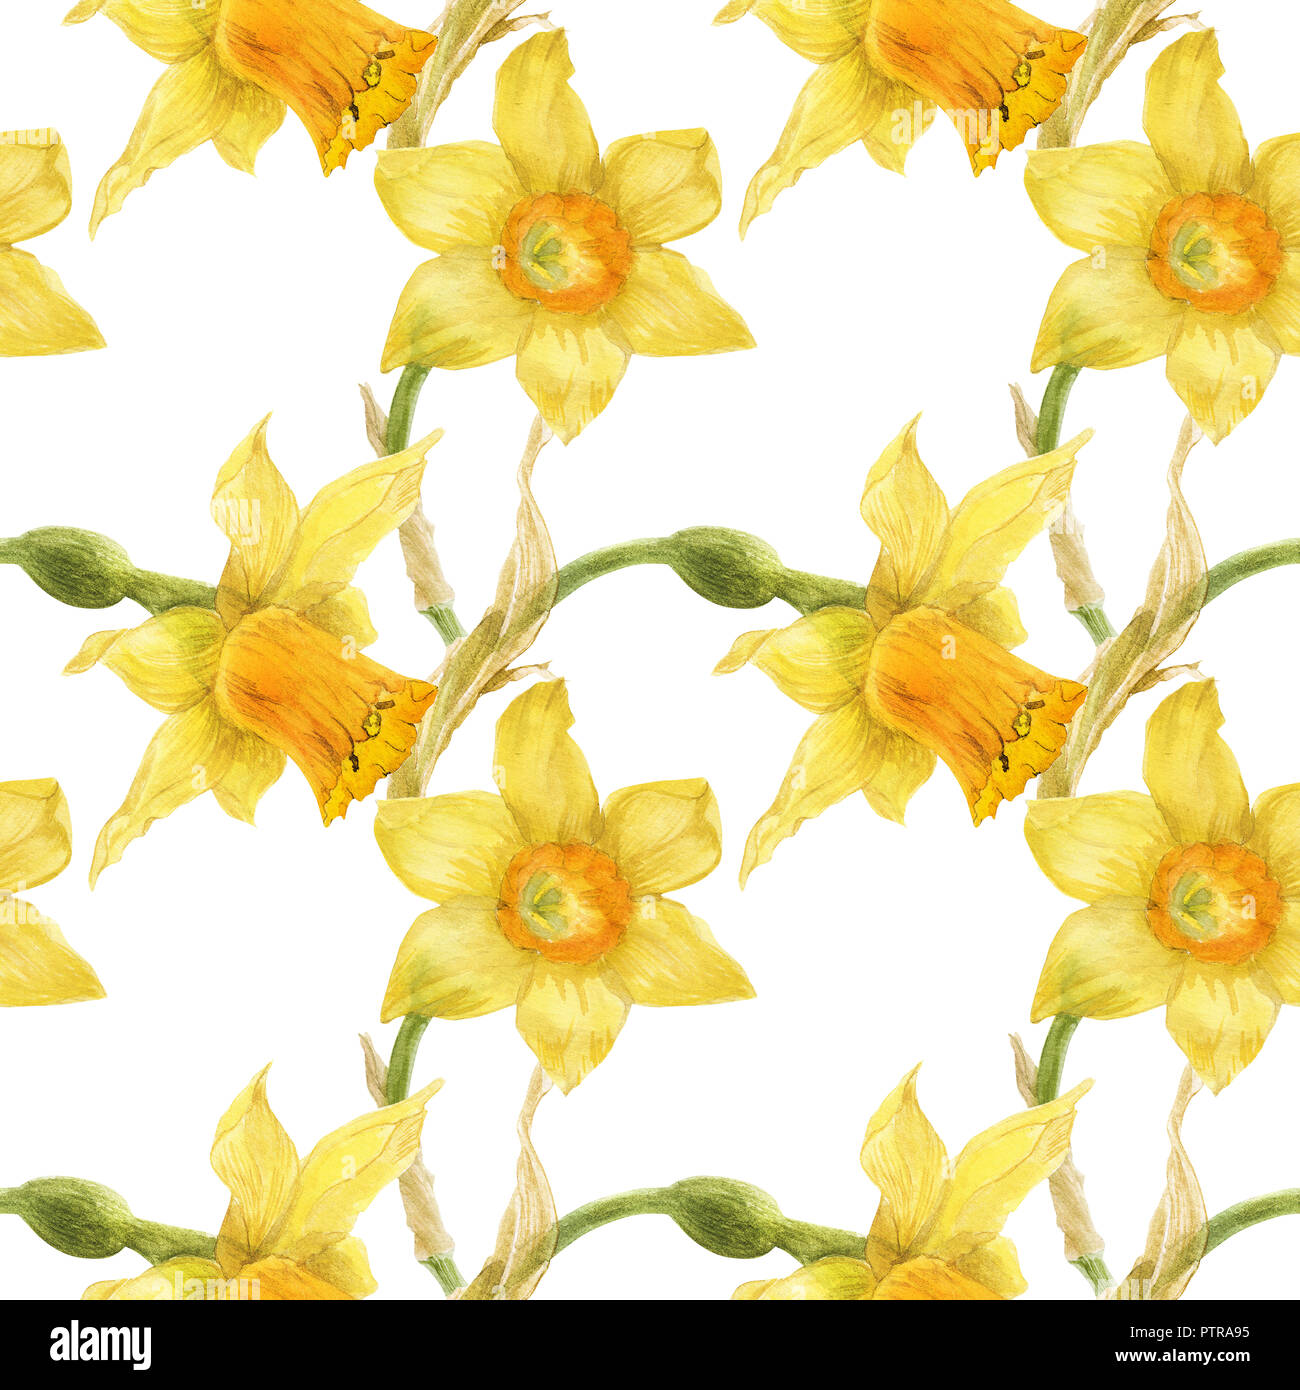 Watercolor botanical realistic floral pattern with narcissus. Bright yellow daffodil on a white background, path included Stock Photo